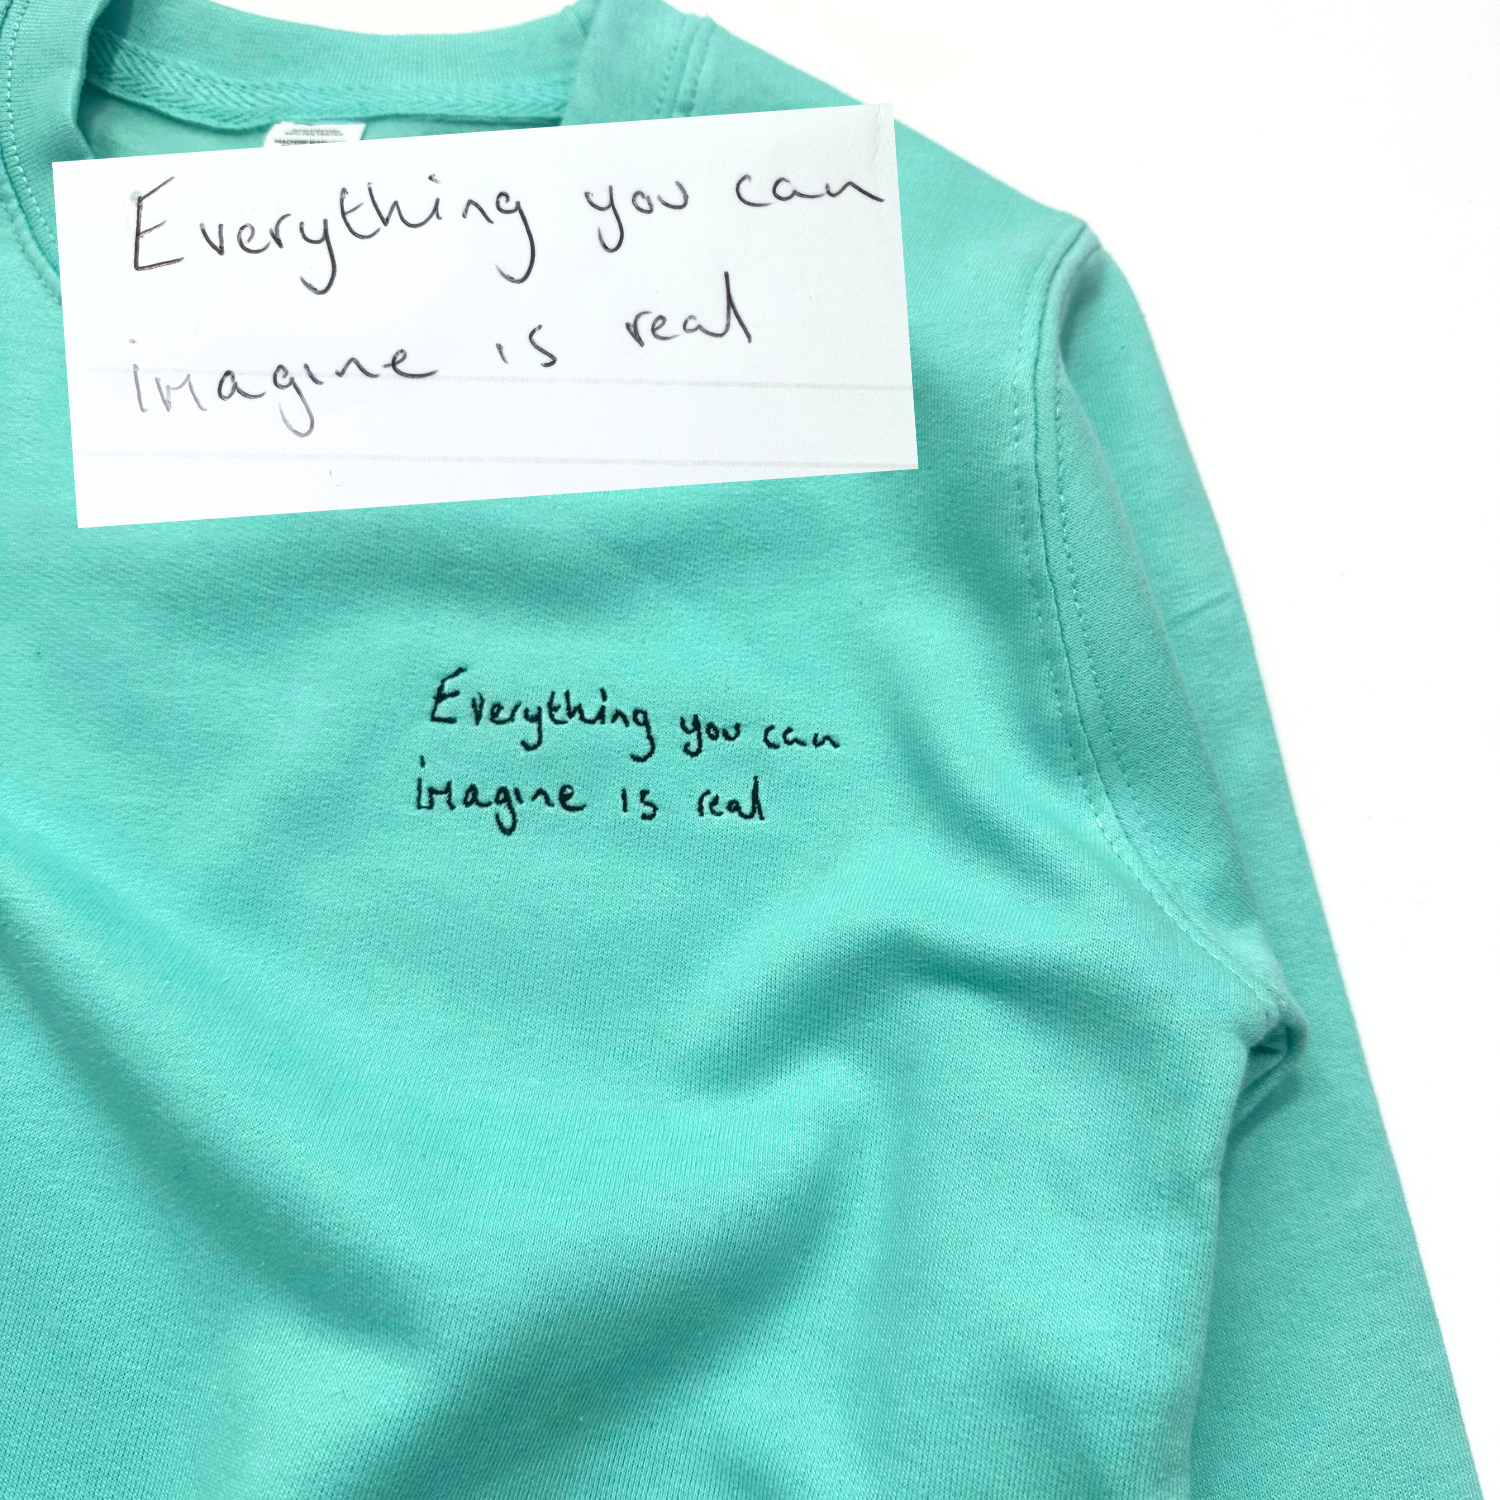 Cherish your child's special message with this personalized sweater. Simply upload a photo of the handwritten note and we will transform it into a beautiful embroidery on a luxury sweater. The perfect keepsake to wear and treasure for years to come